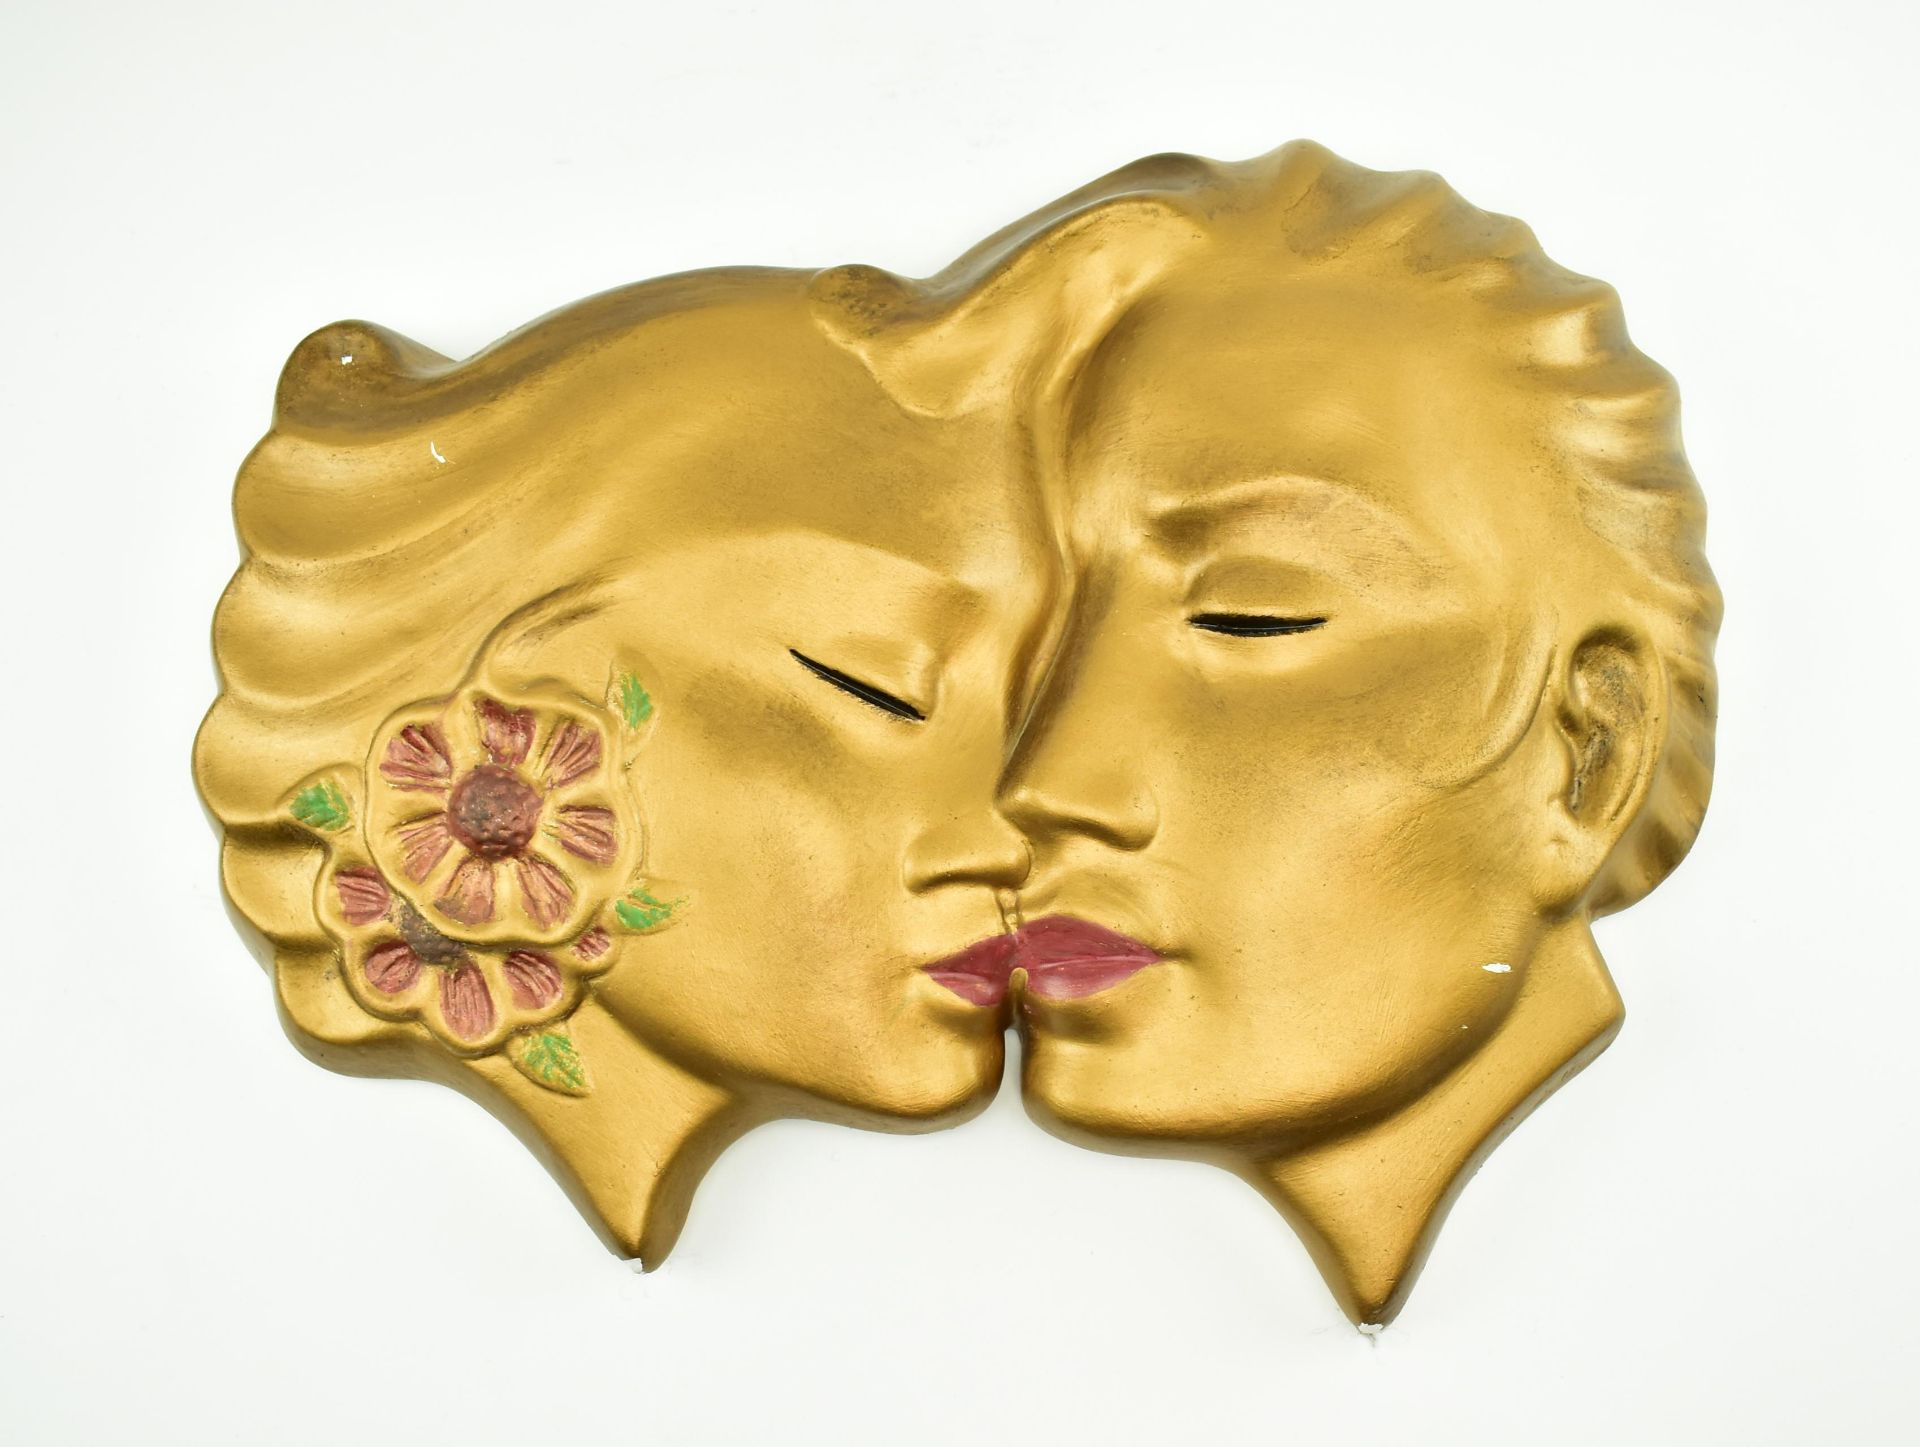 ABCO - MID CENTURY ART DECO STYLE GILT LOVERS WALL HANGING